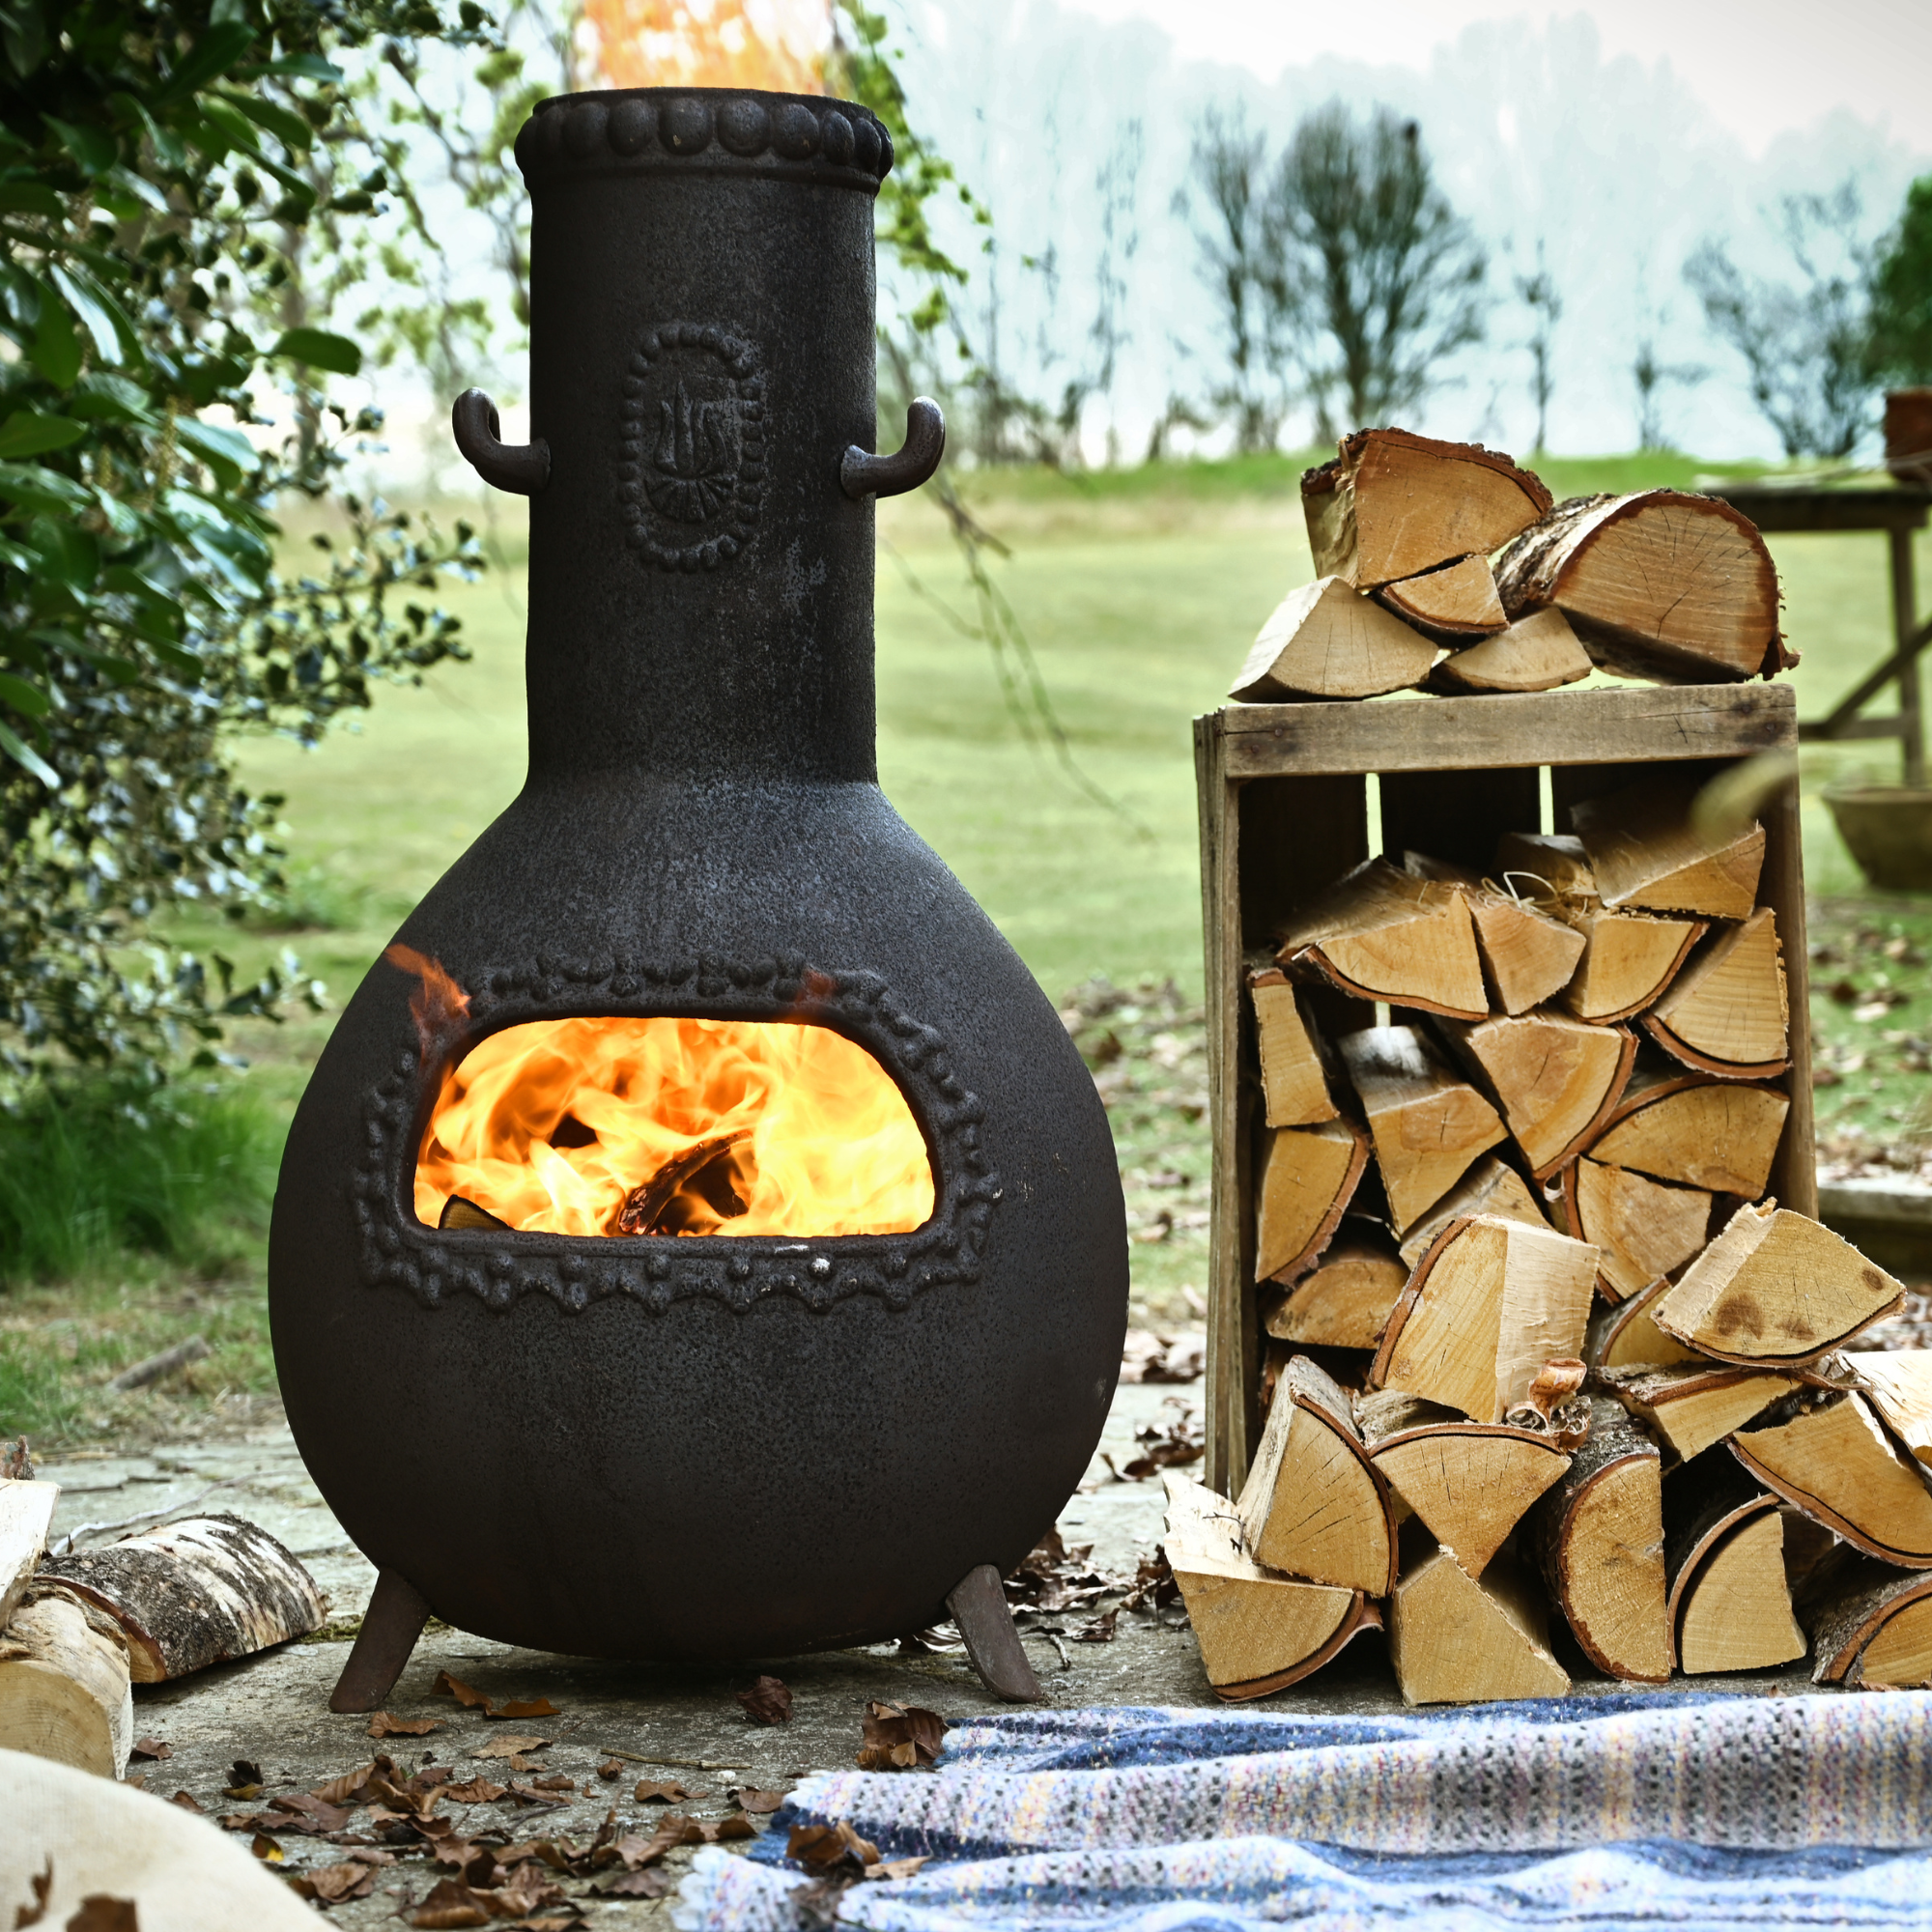 Chiminea Starter Kit. Kiln Dried Hardwood Logs, Kindling, Natural Firelighters and Matches